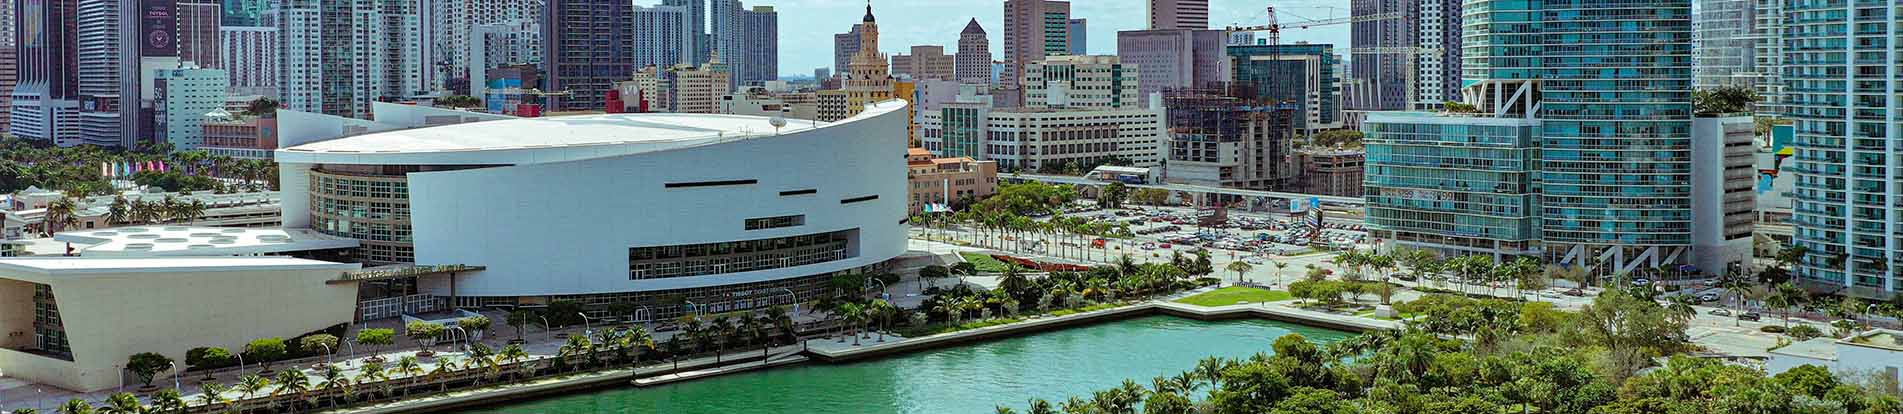 Miami Travel Guide: All You Need To Know